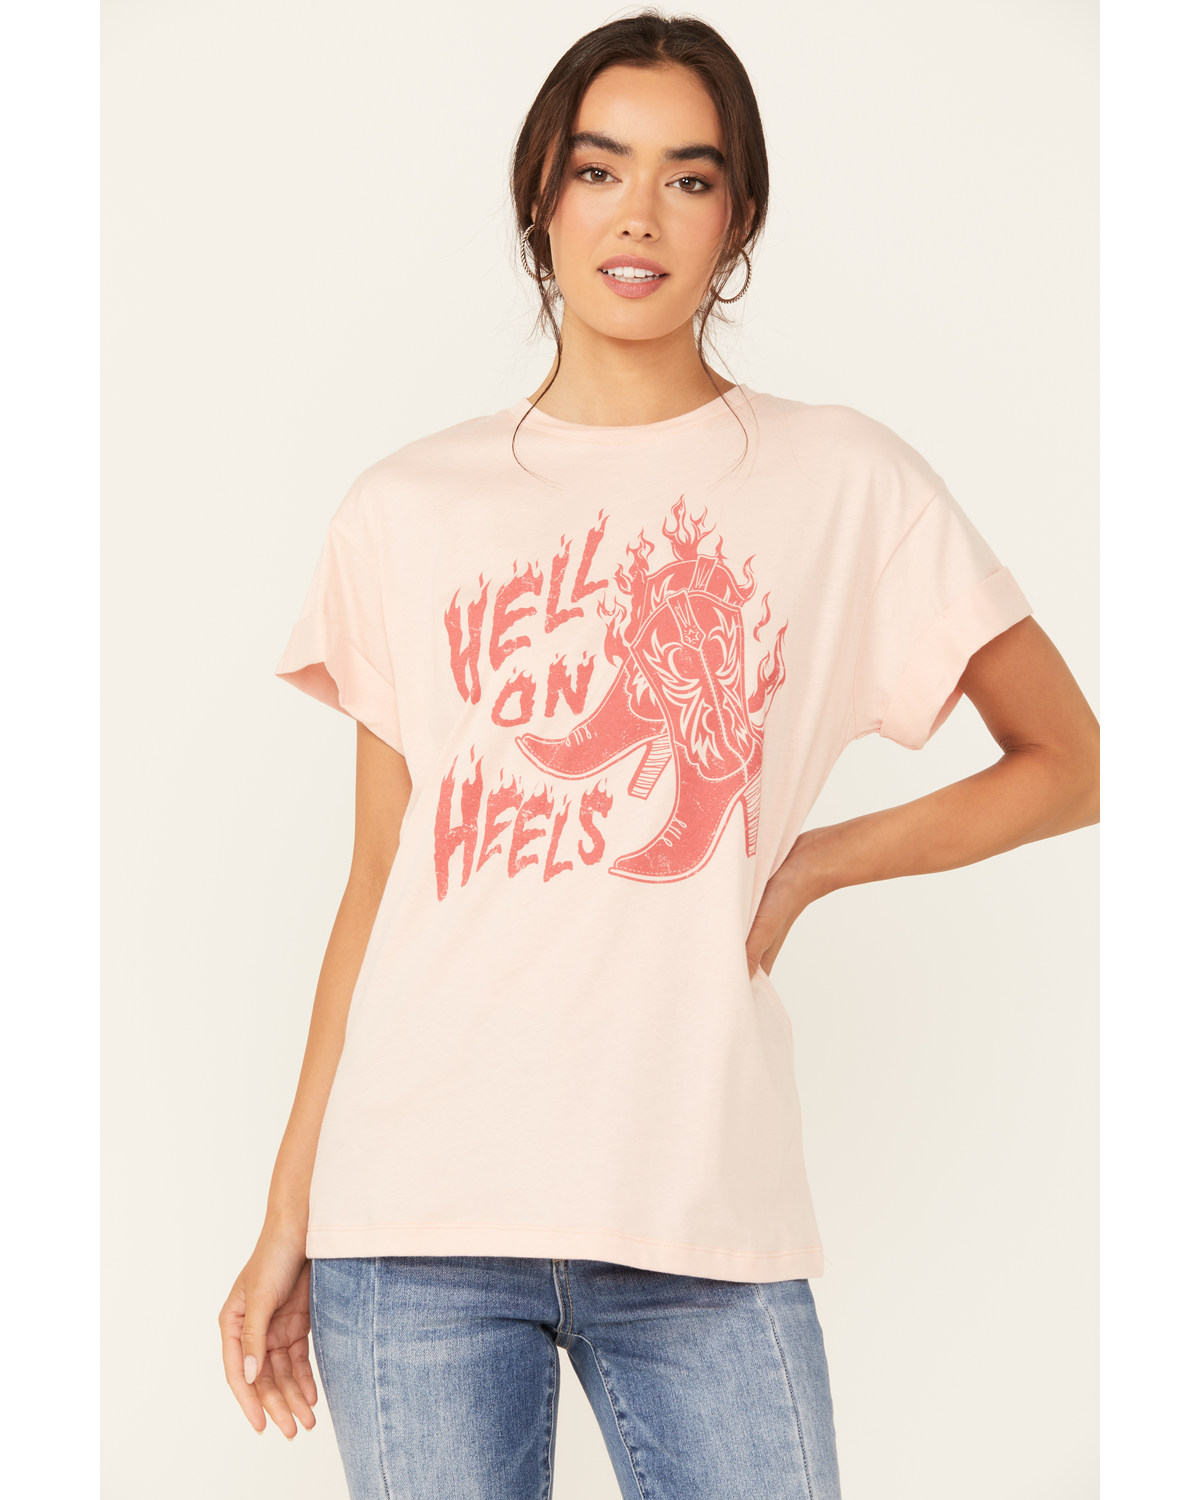 Youth Revolt Women's Hell on Heels Rolled Short Sleeve Graphic Tee